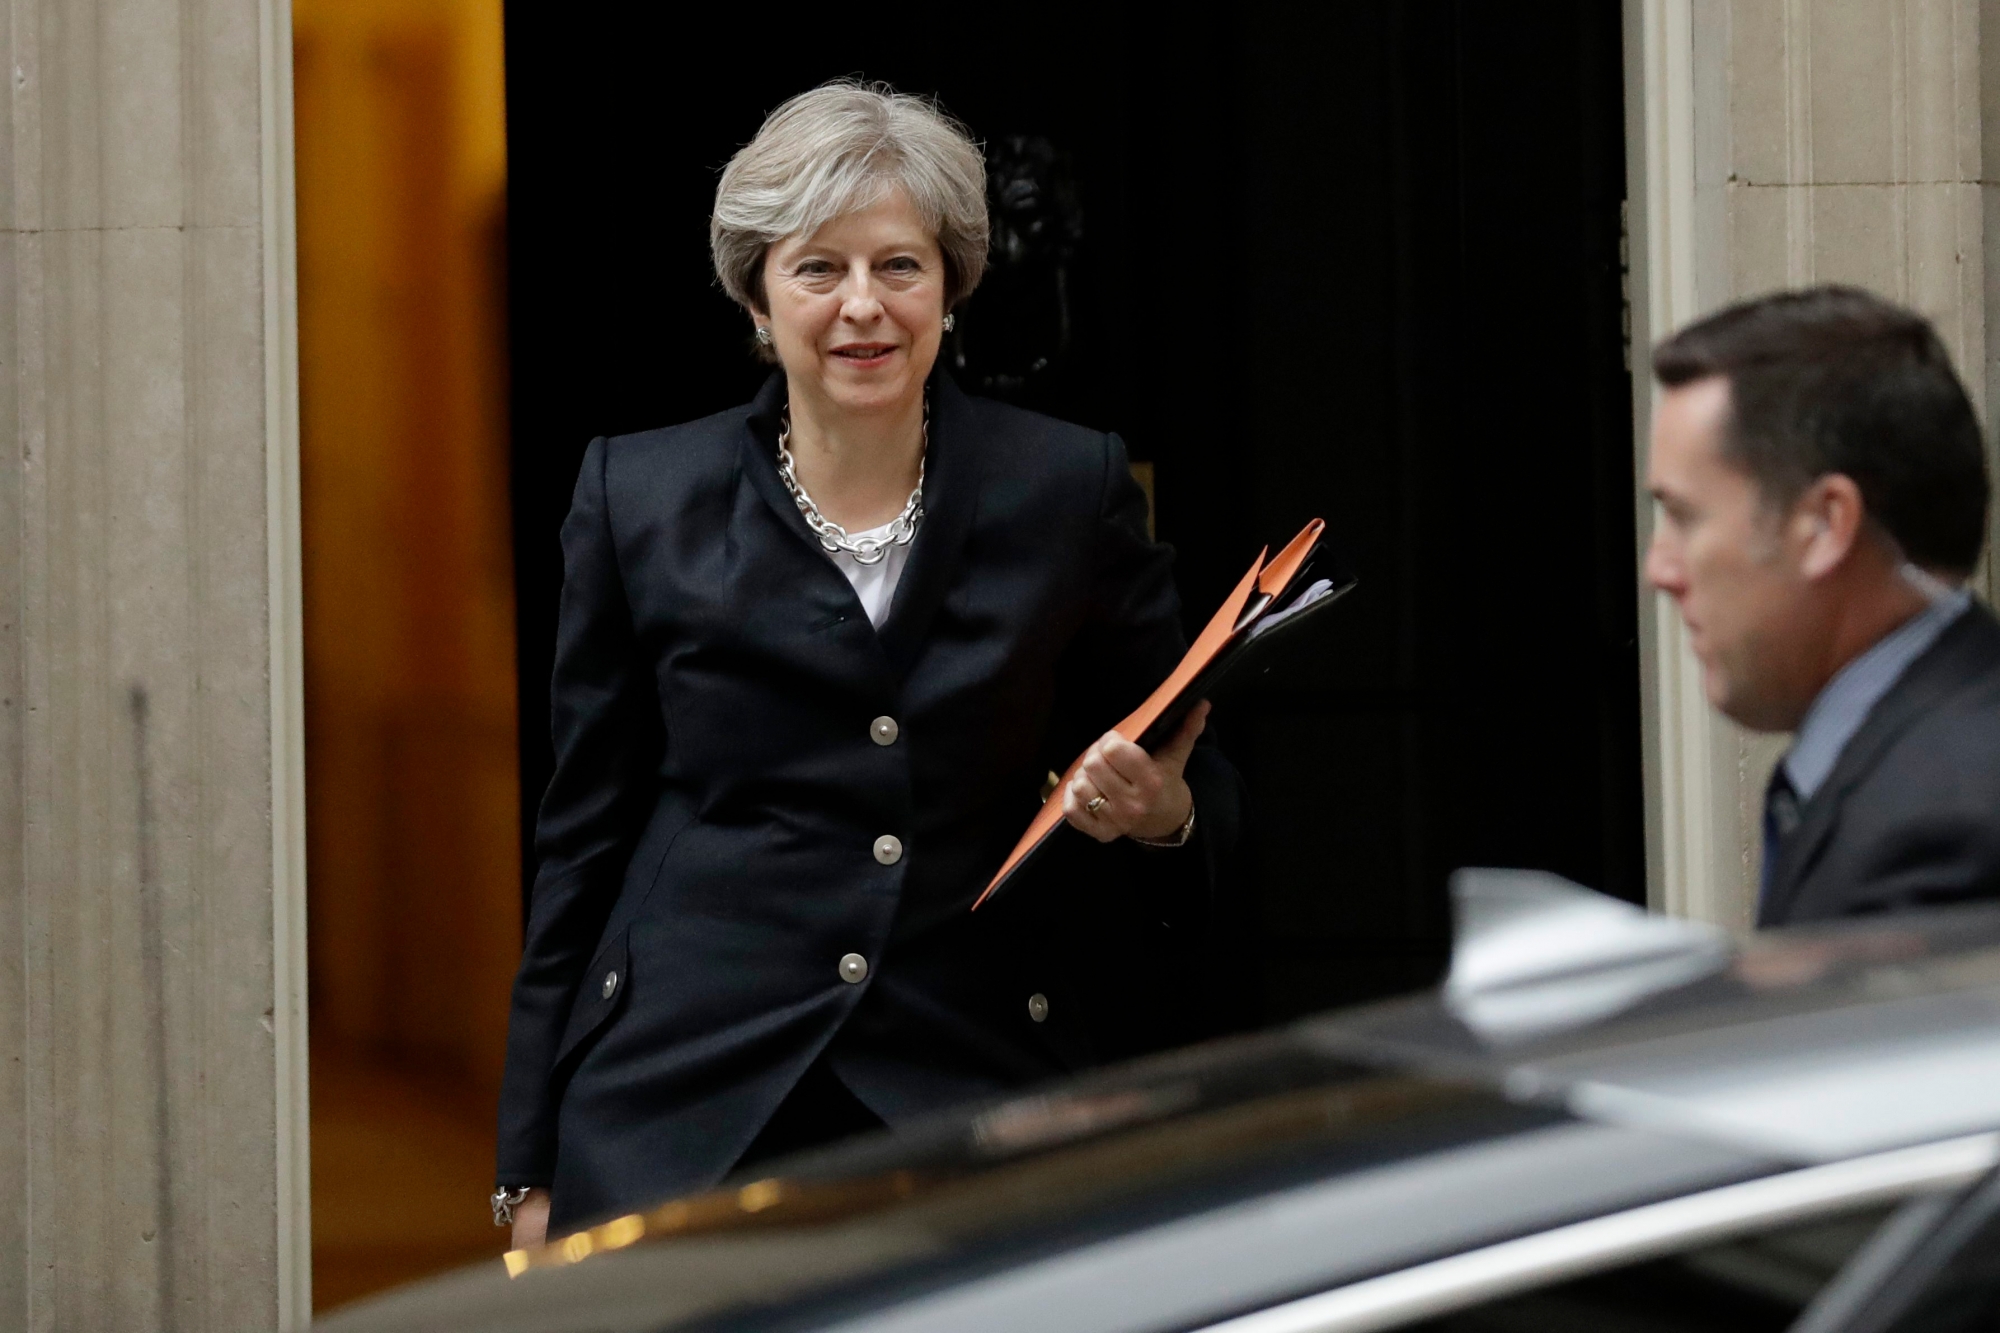 British Prime Minister Theresa May leaves 10 Downing Street to deliver a statement on Brexit to Parliament in London, Monday, Oct. 9, 2017. (AP Photo/Matt Dunham) Britain Politics